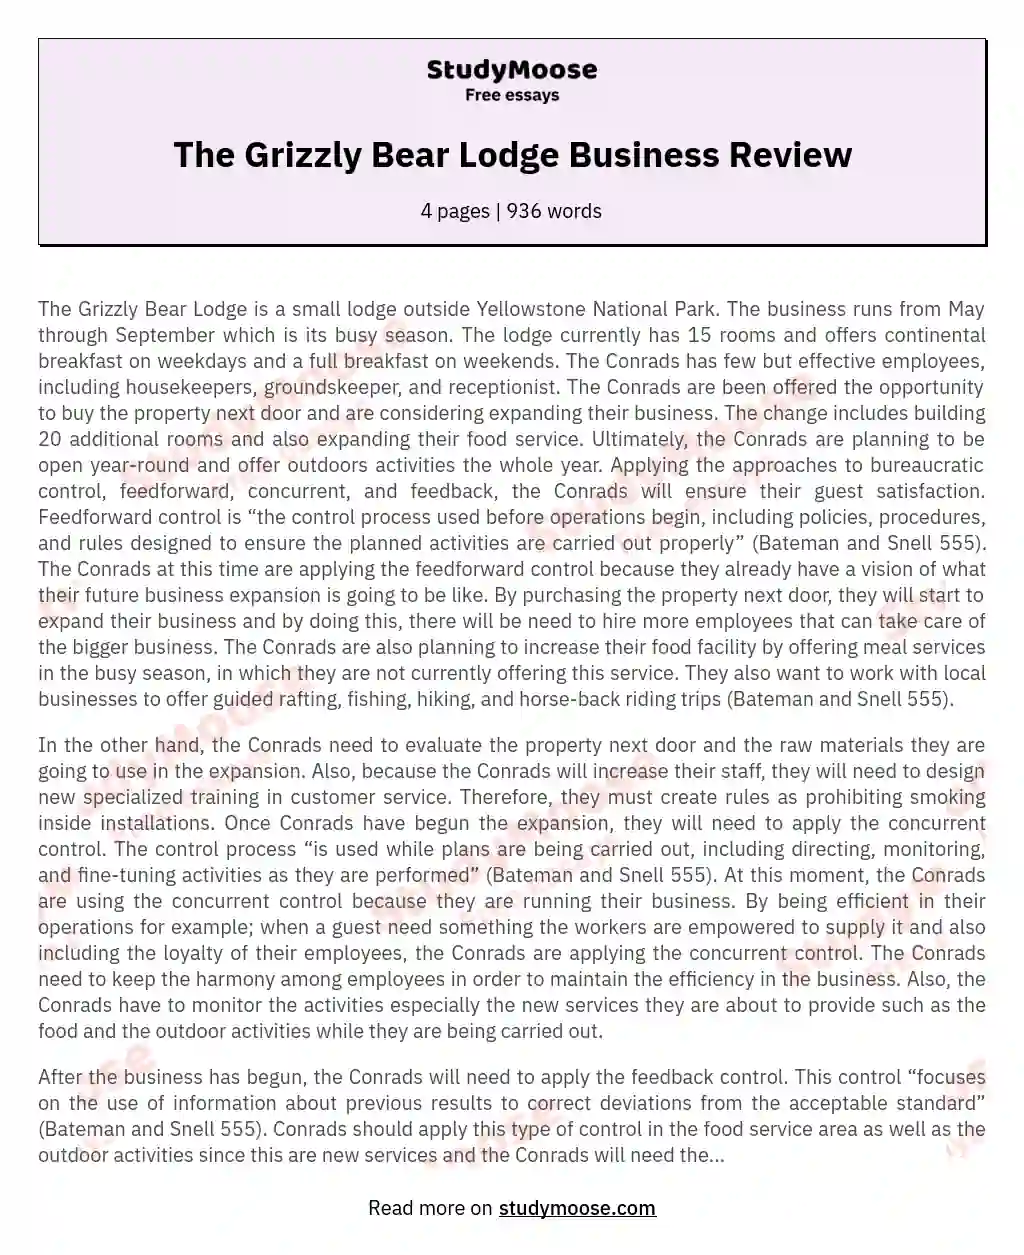 The Grizzly Bear Lodge Business Review essay